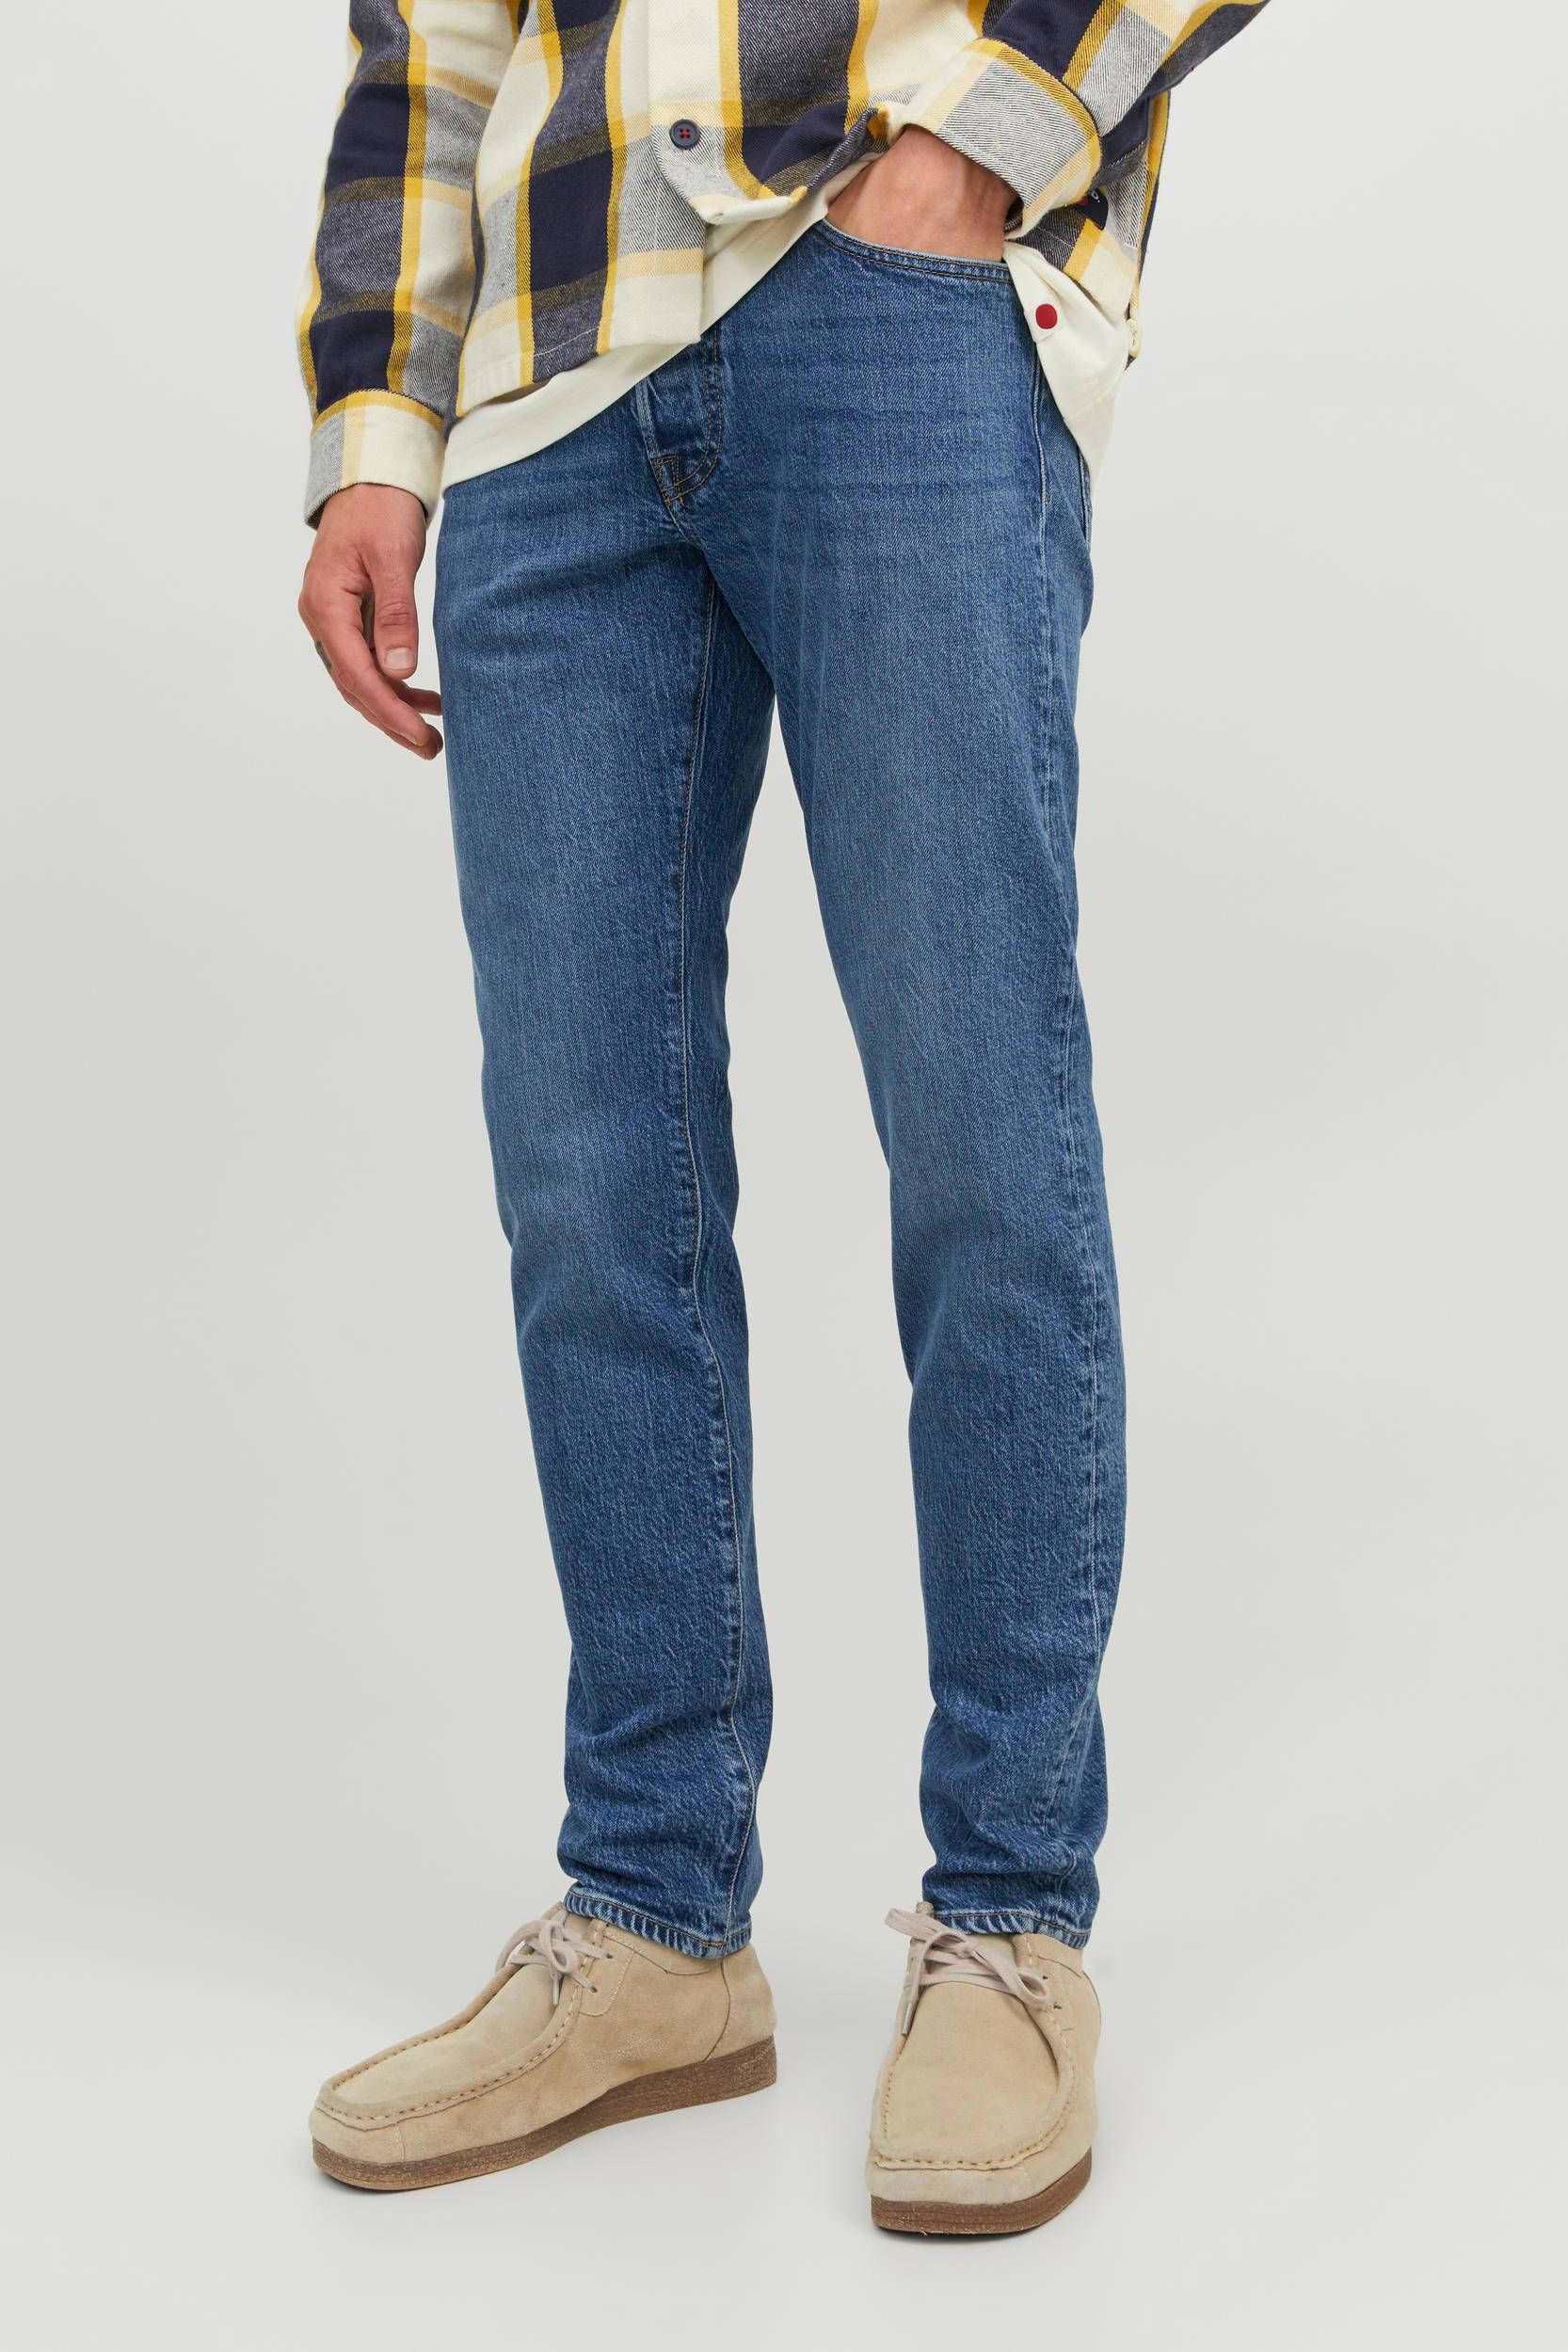 RDD Royal RI 324 Selvedge Relaxed Fit Jeans